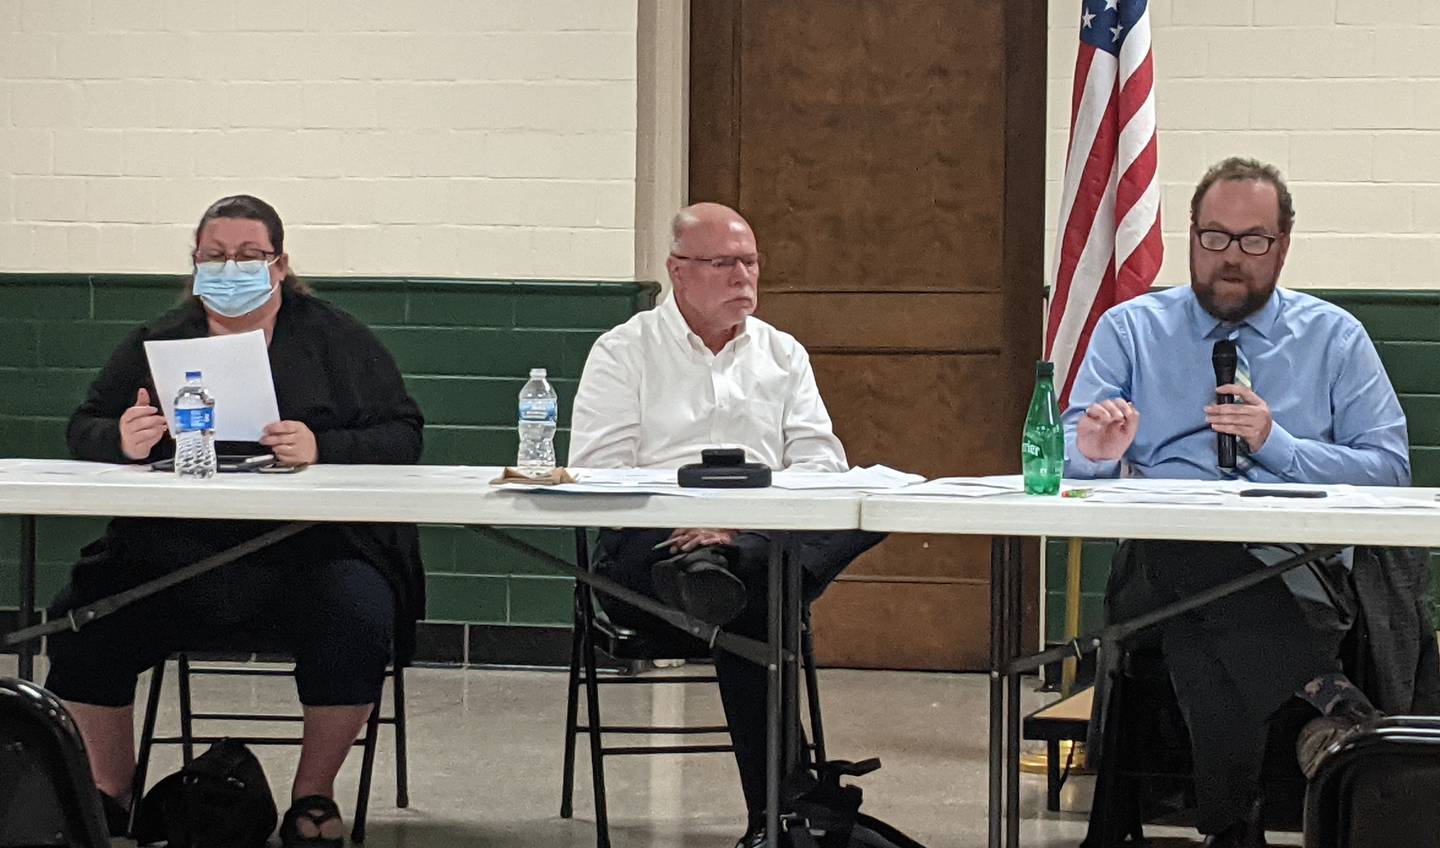 Dixon Library Director Antony Deter, right, speaks about possible policy changes during the Library Board meeting Monday, Aug. 8, 2022.